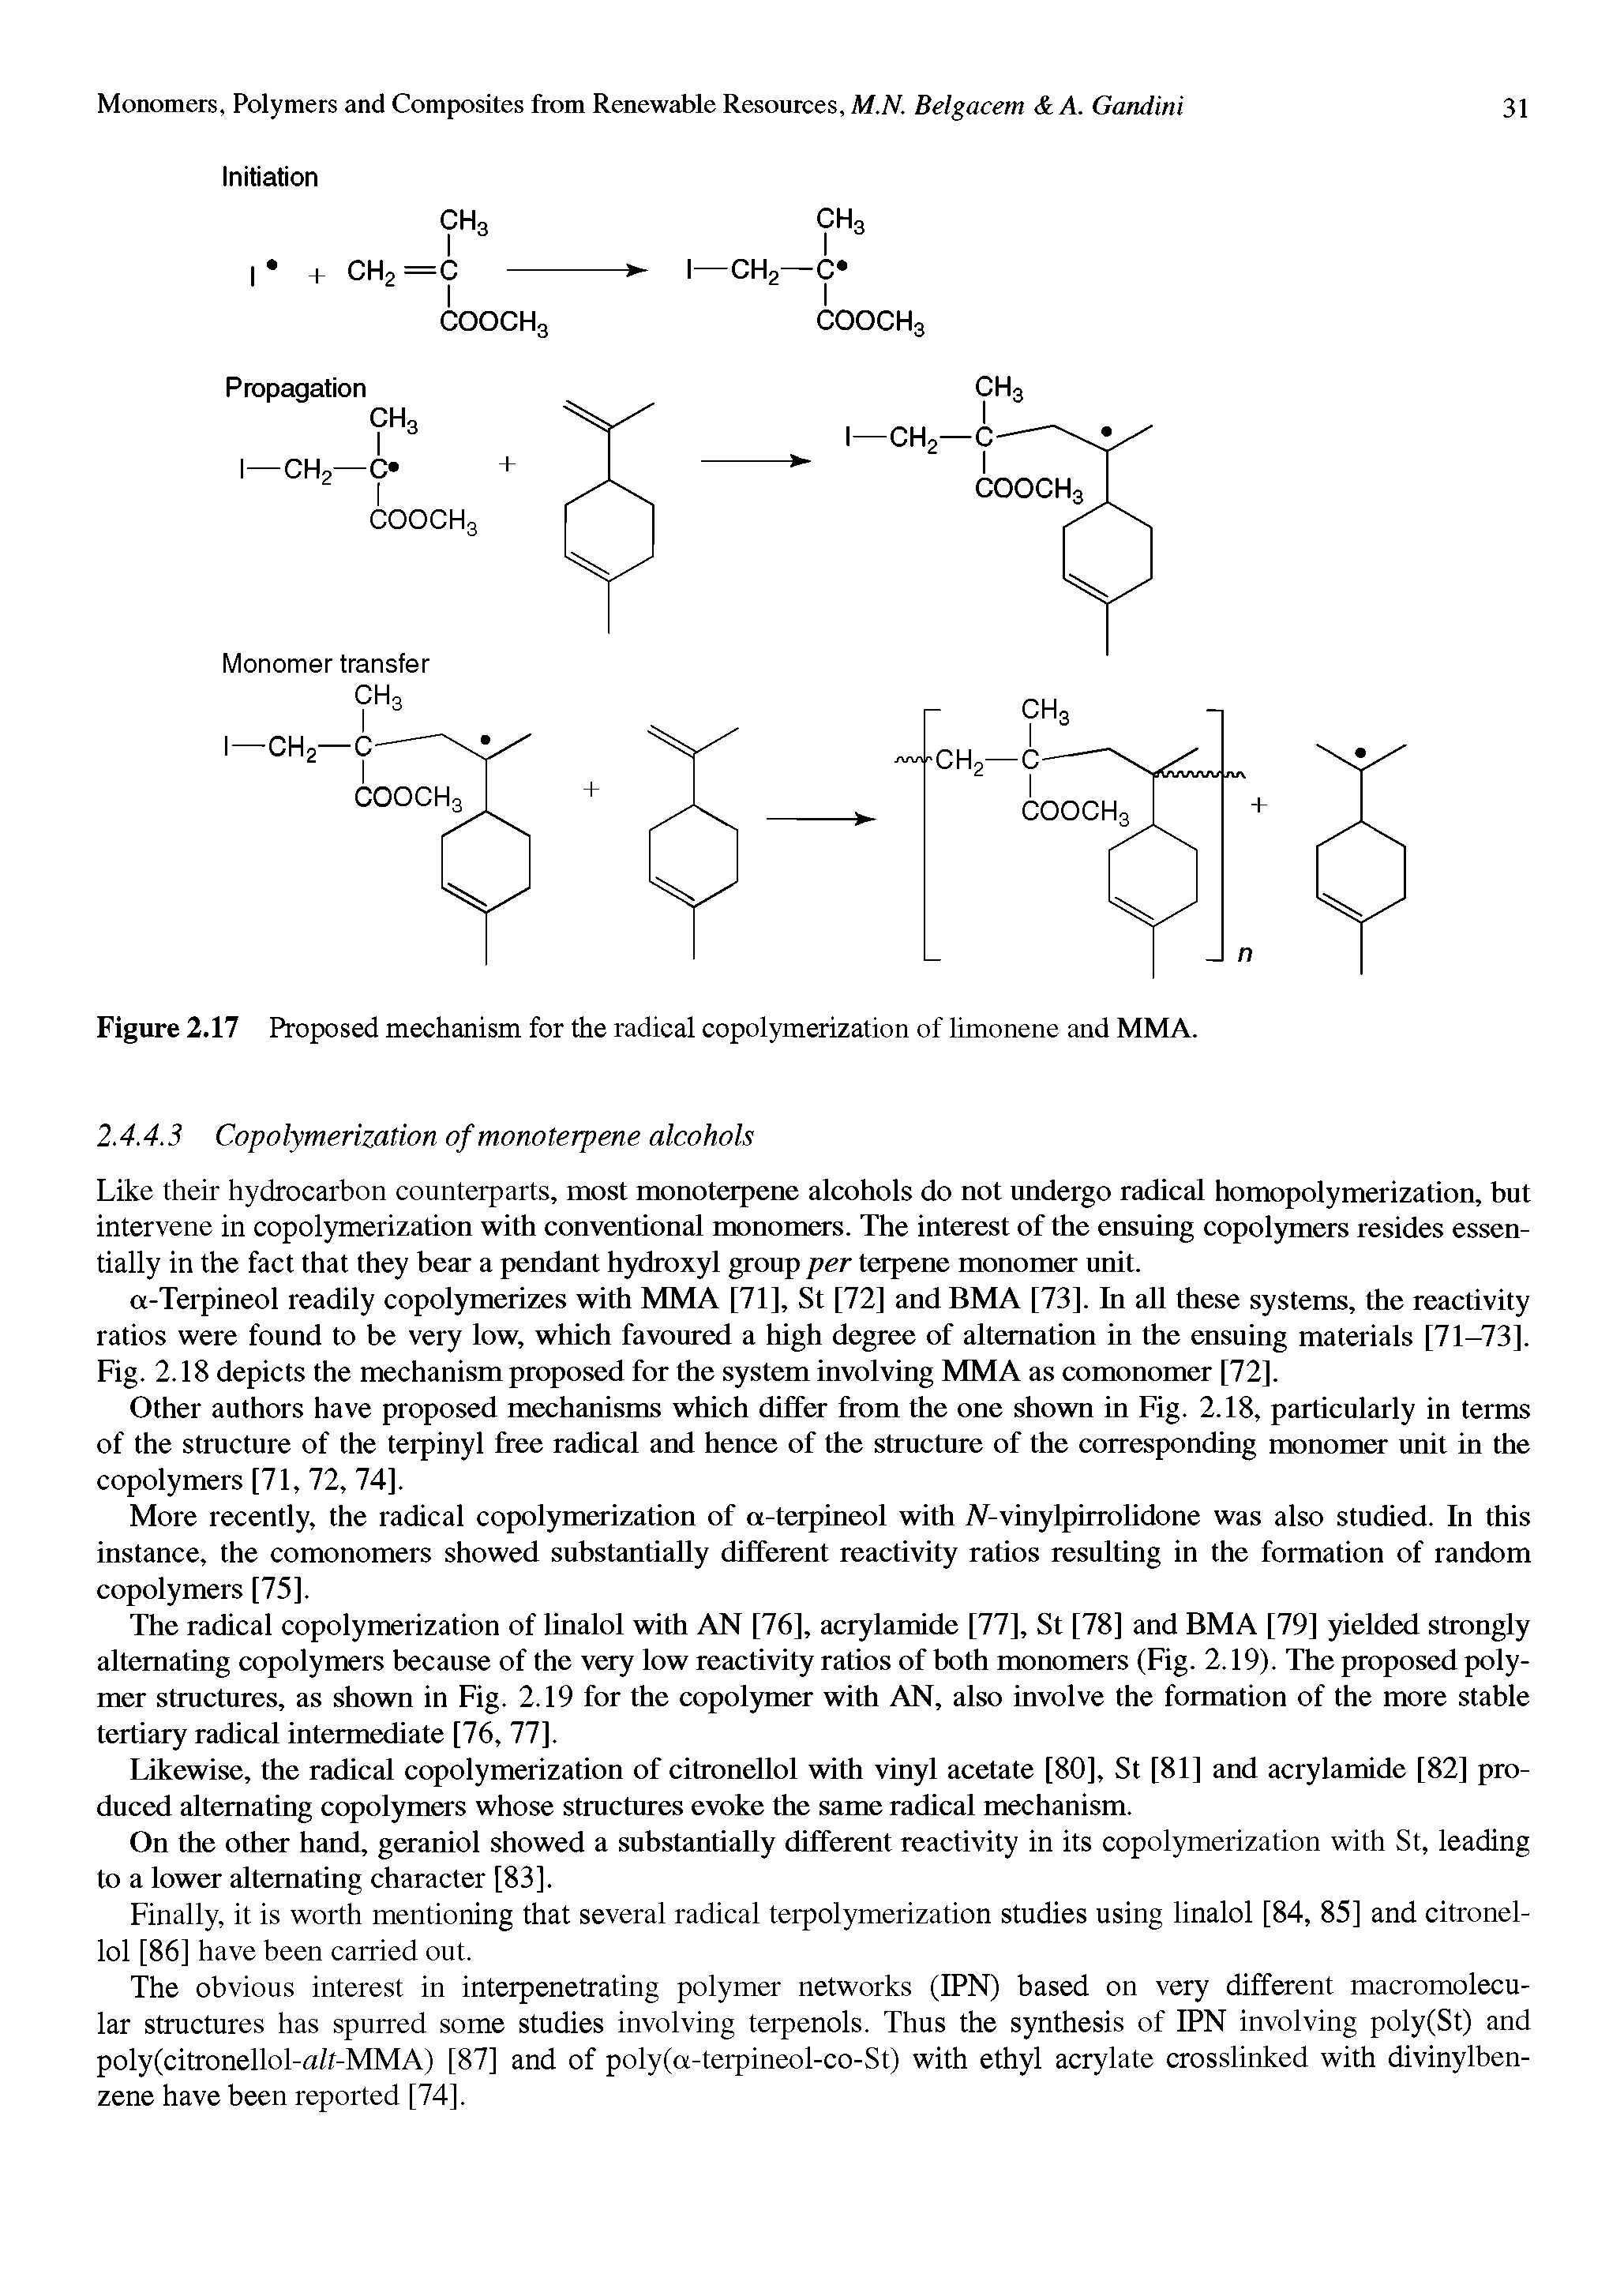 Figure 2.17 Proposed mechanism for the radical copolymerization of limonene and MMA.